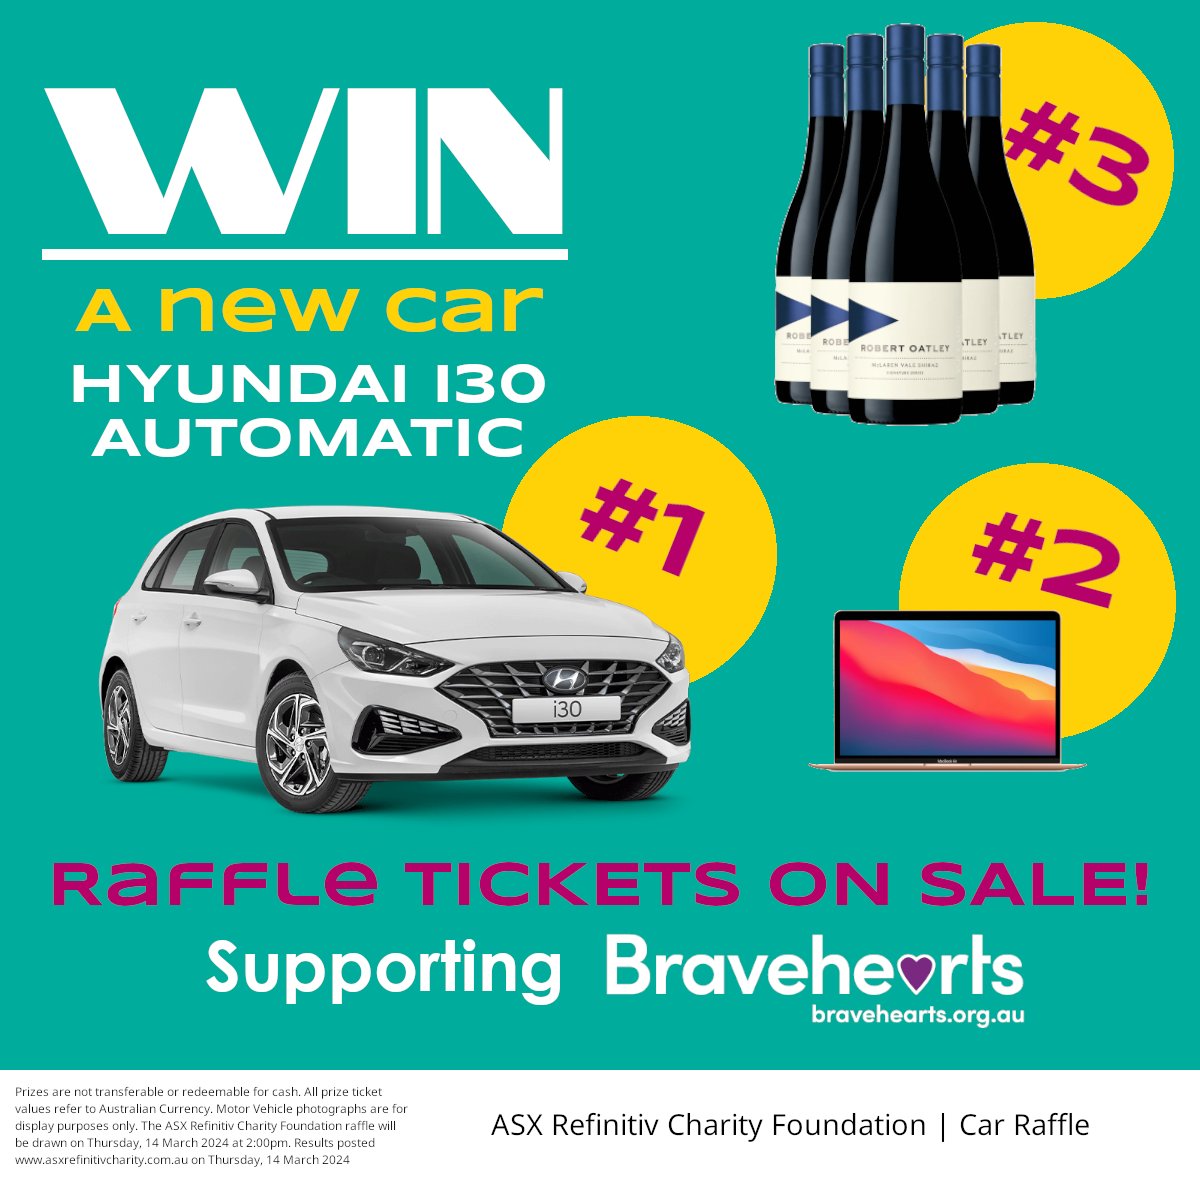 This year we’re excited to be a part of the ASX/Refinitiv Annual Car Raffle! By buying a ticket you are supporting Bravehearts and our mission to prevent child sexual abuse. Buy a ticket today: asxrcfau.com/console/raffle… #ProtectKids #Raffle #CarRaffle #CharityRaffle